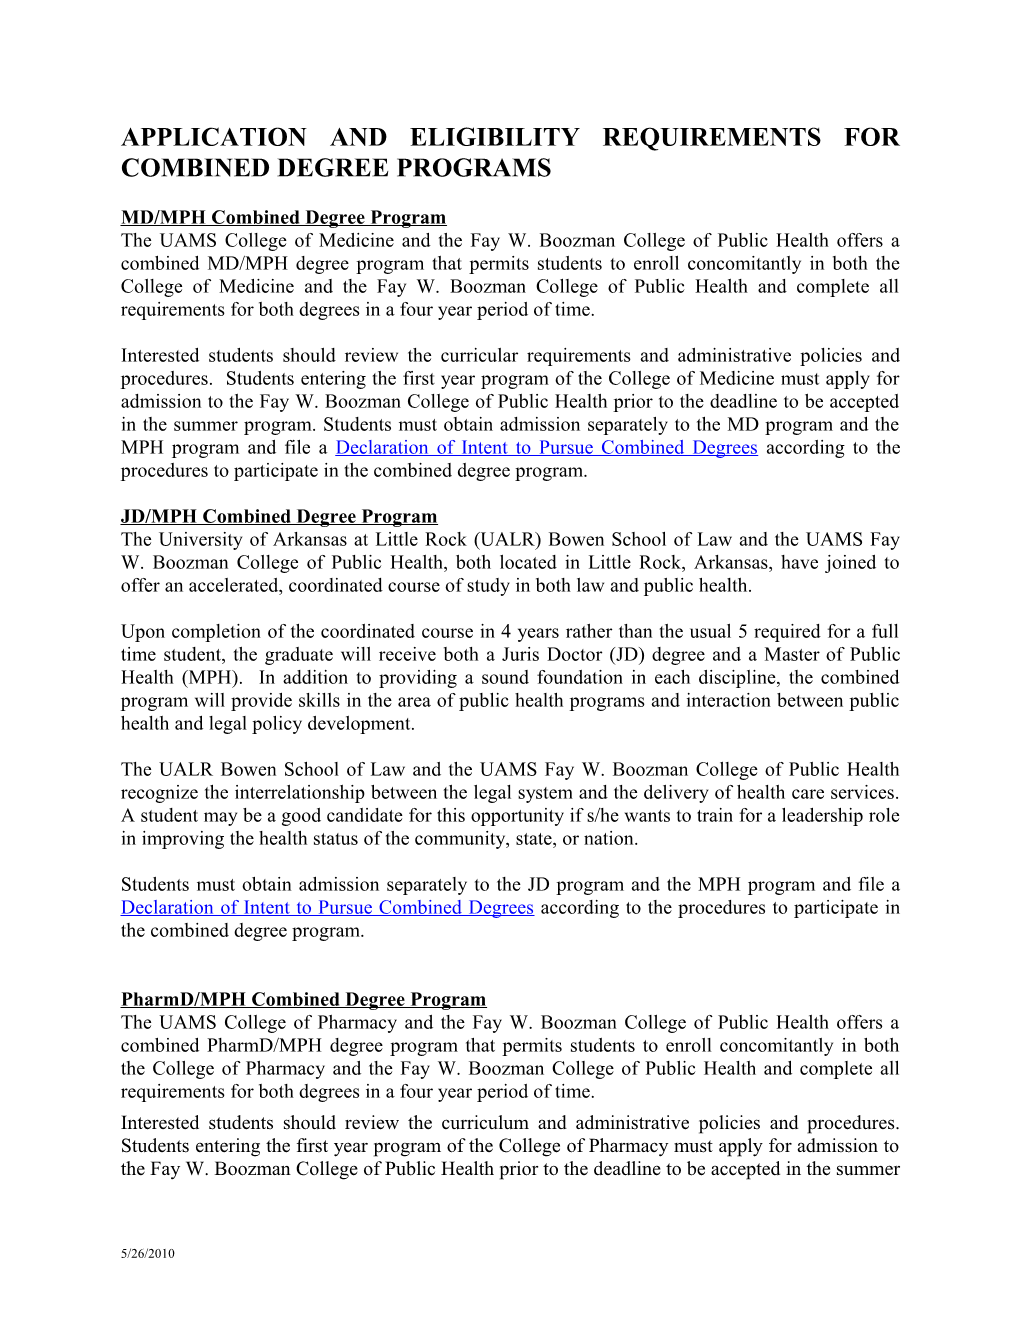 Application and Eligibility Requirements for Combined Degree Programs